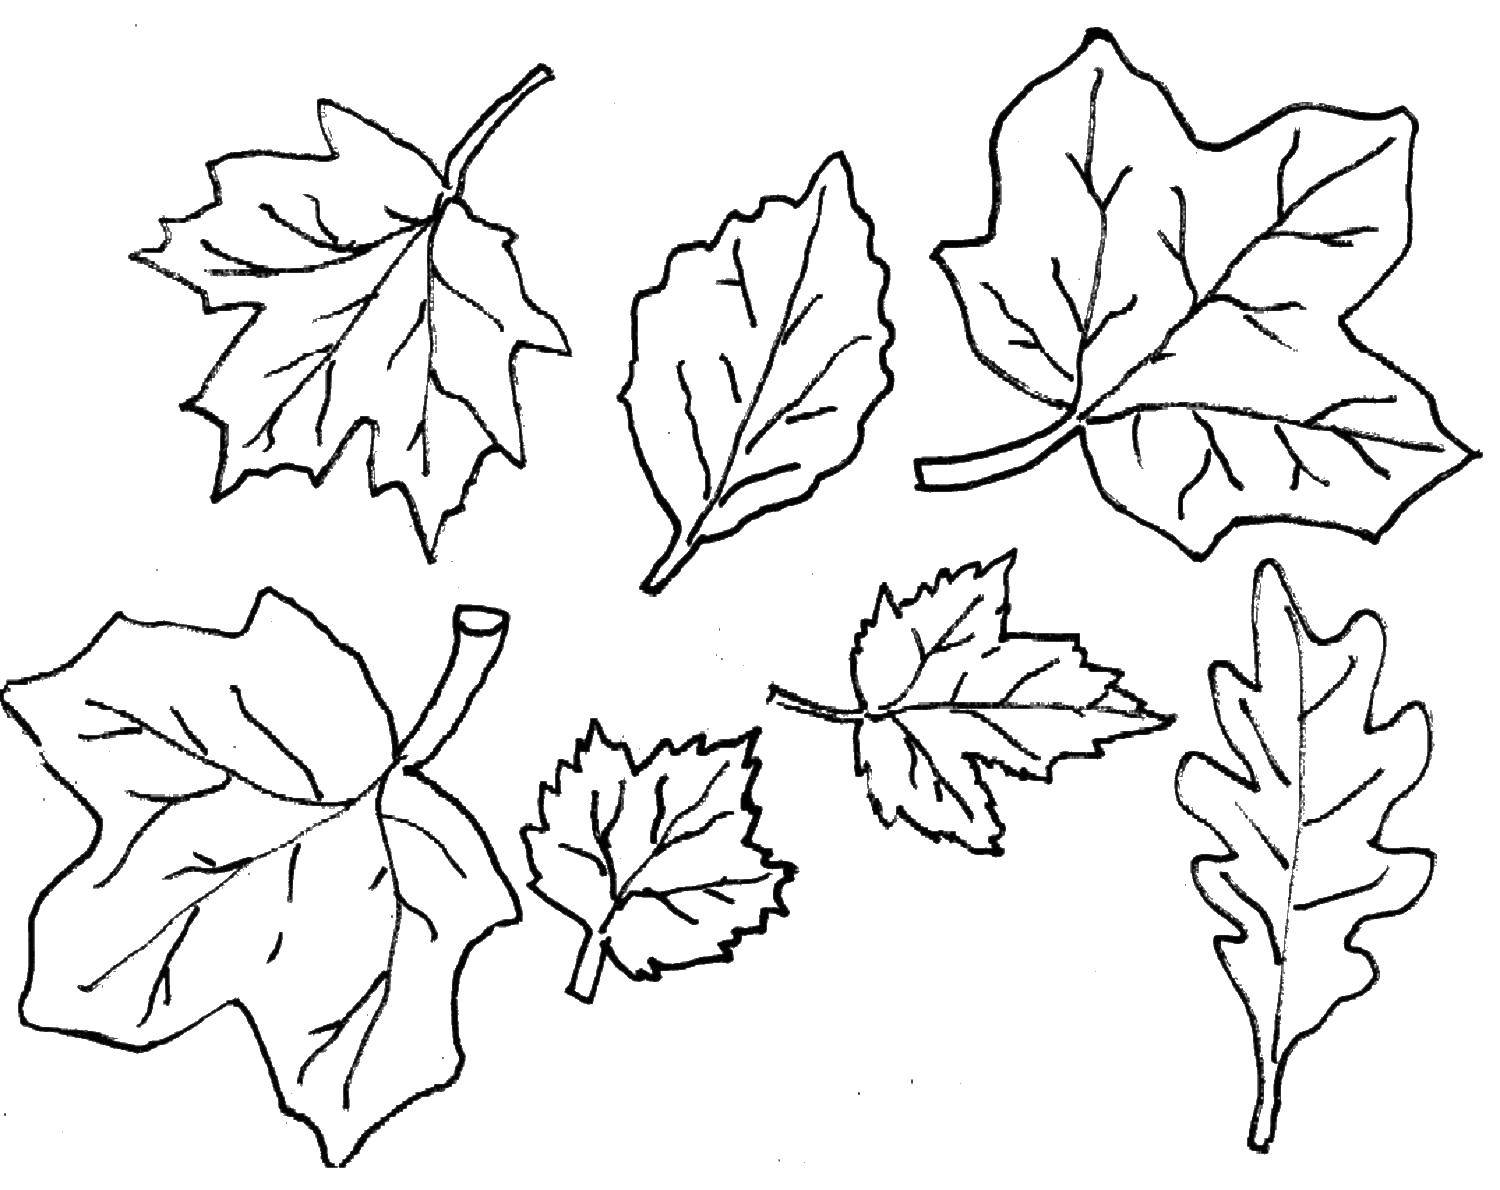 Coloring Leaves. Category Autumn leaves falling. Tags:  leaves.